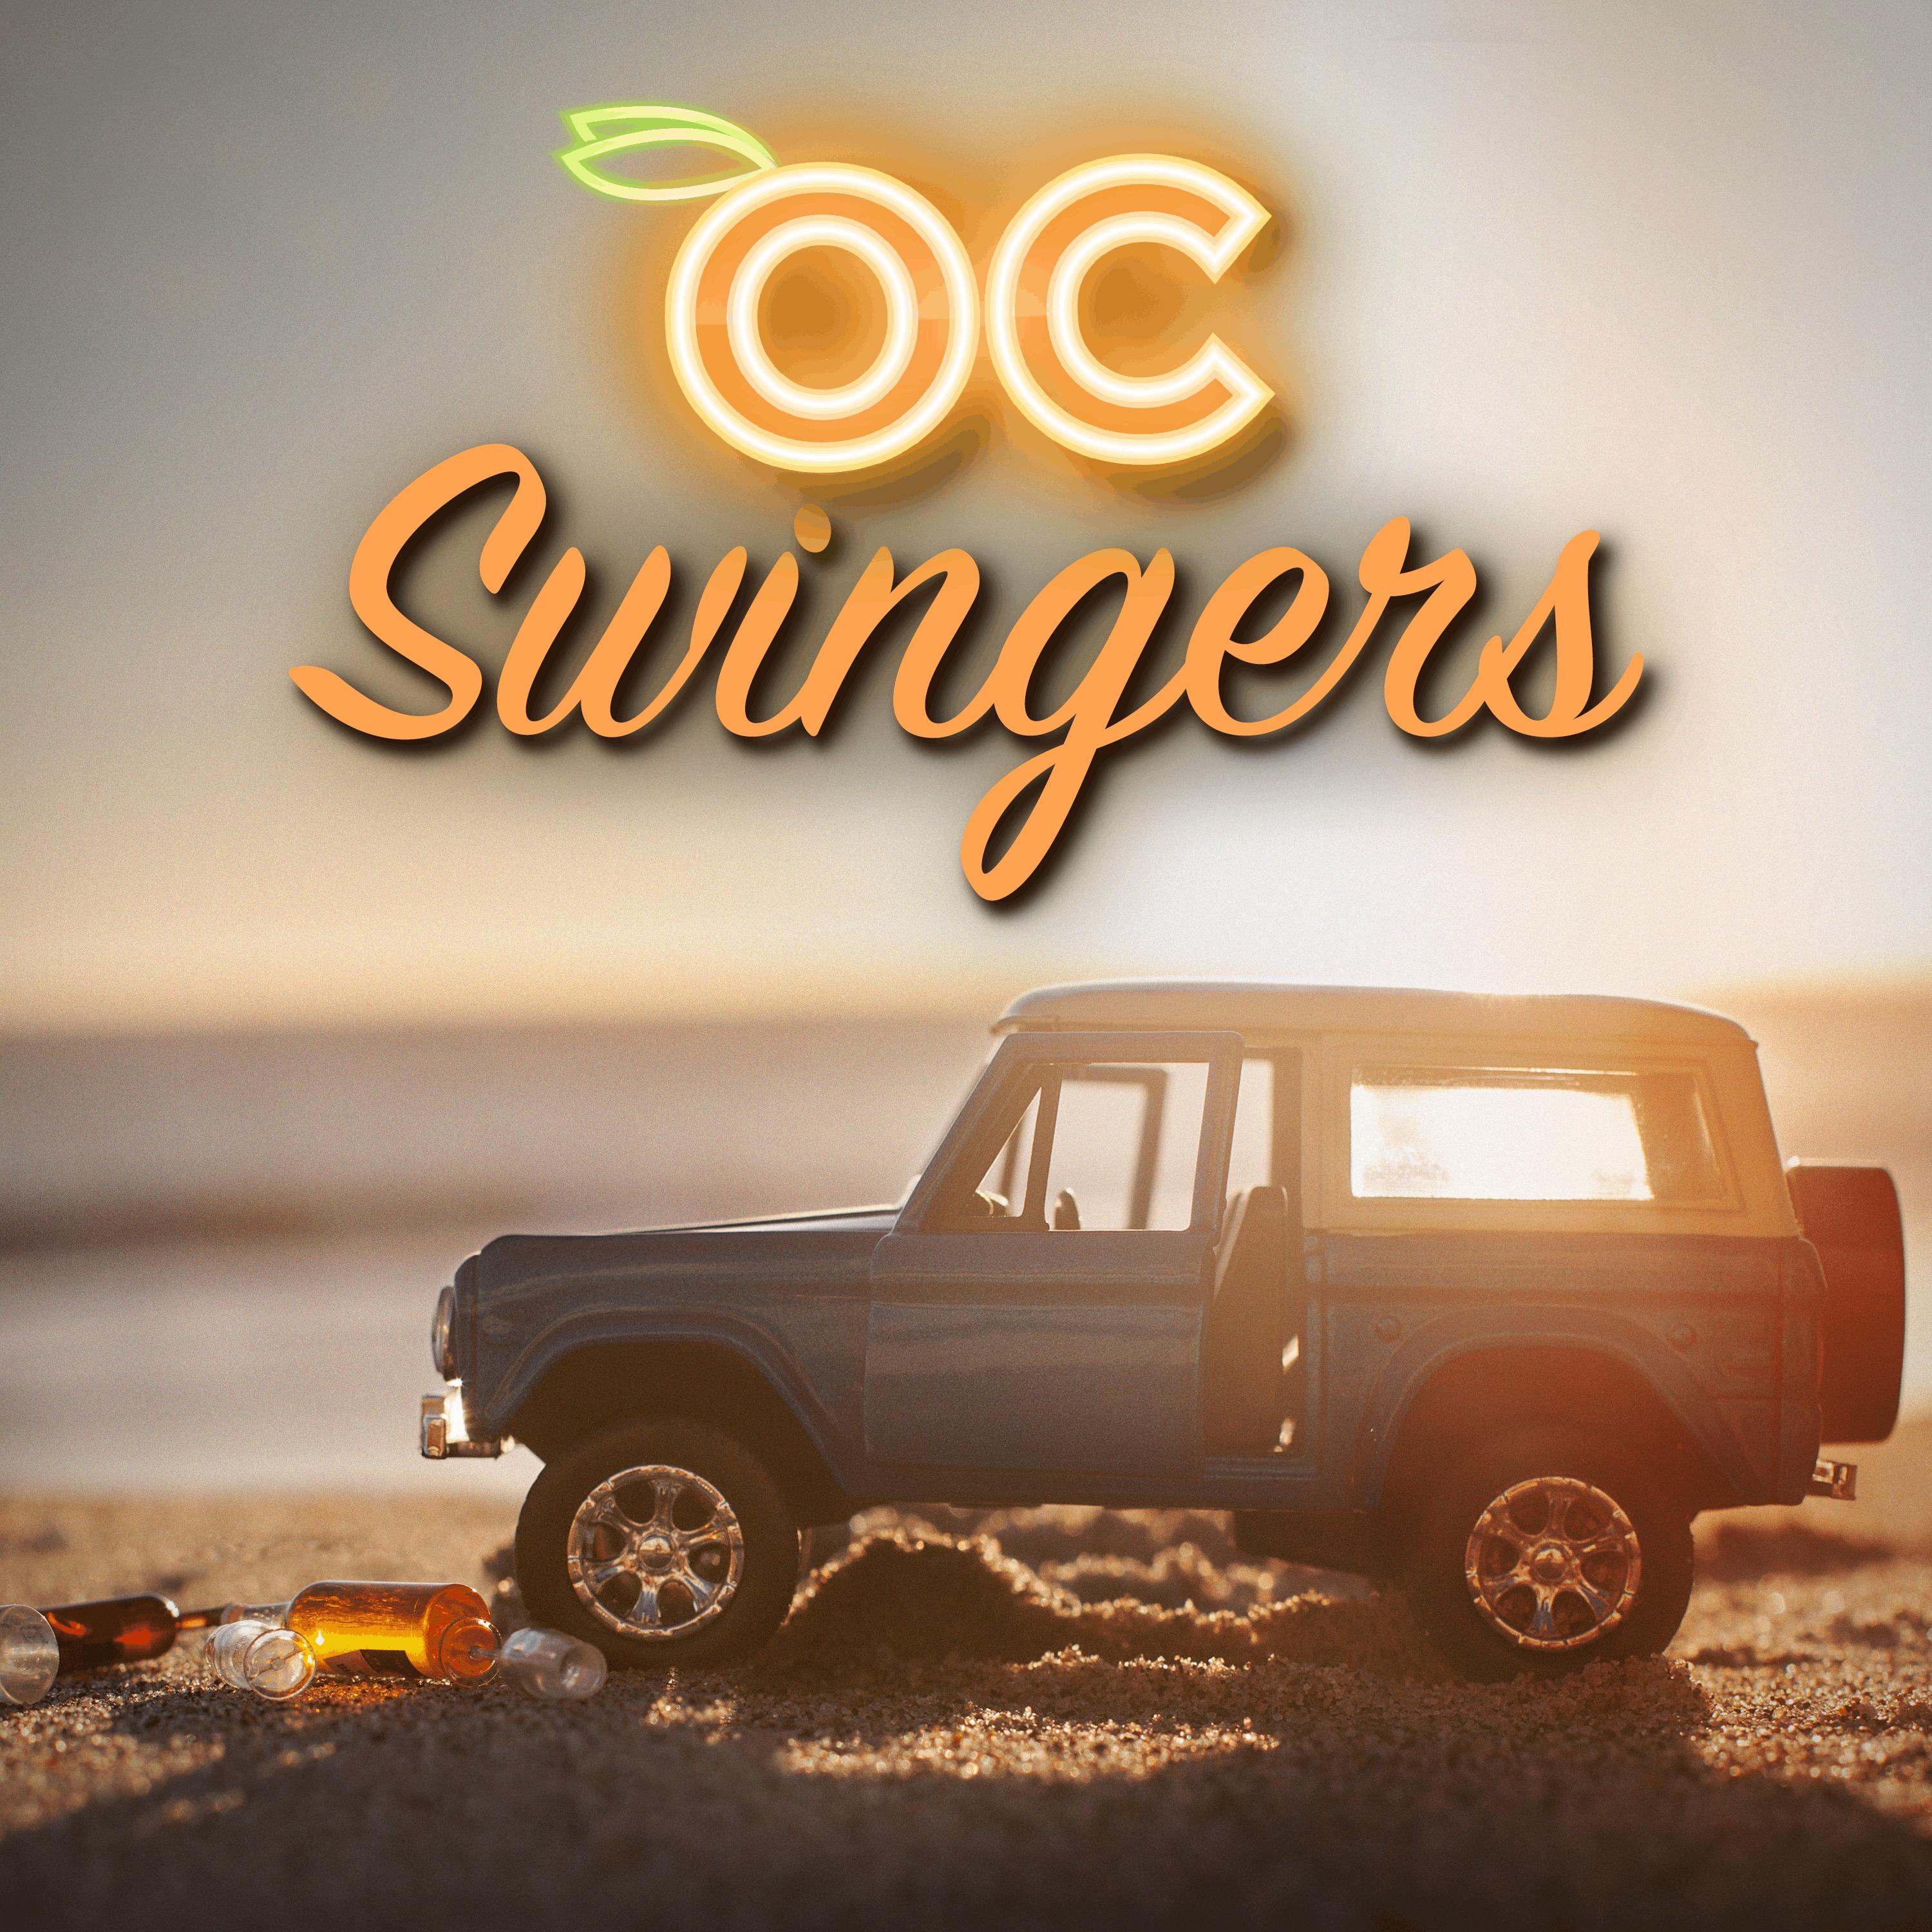 Show poster of O.C. Swingers